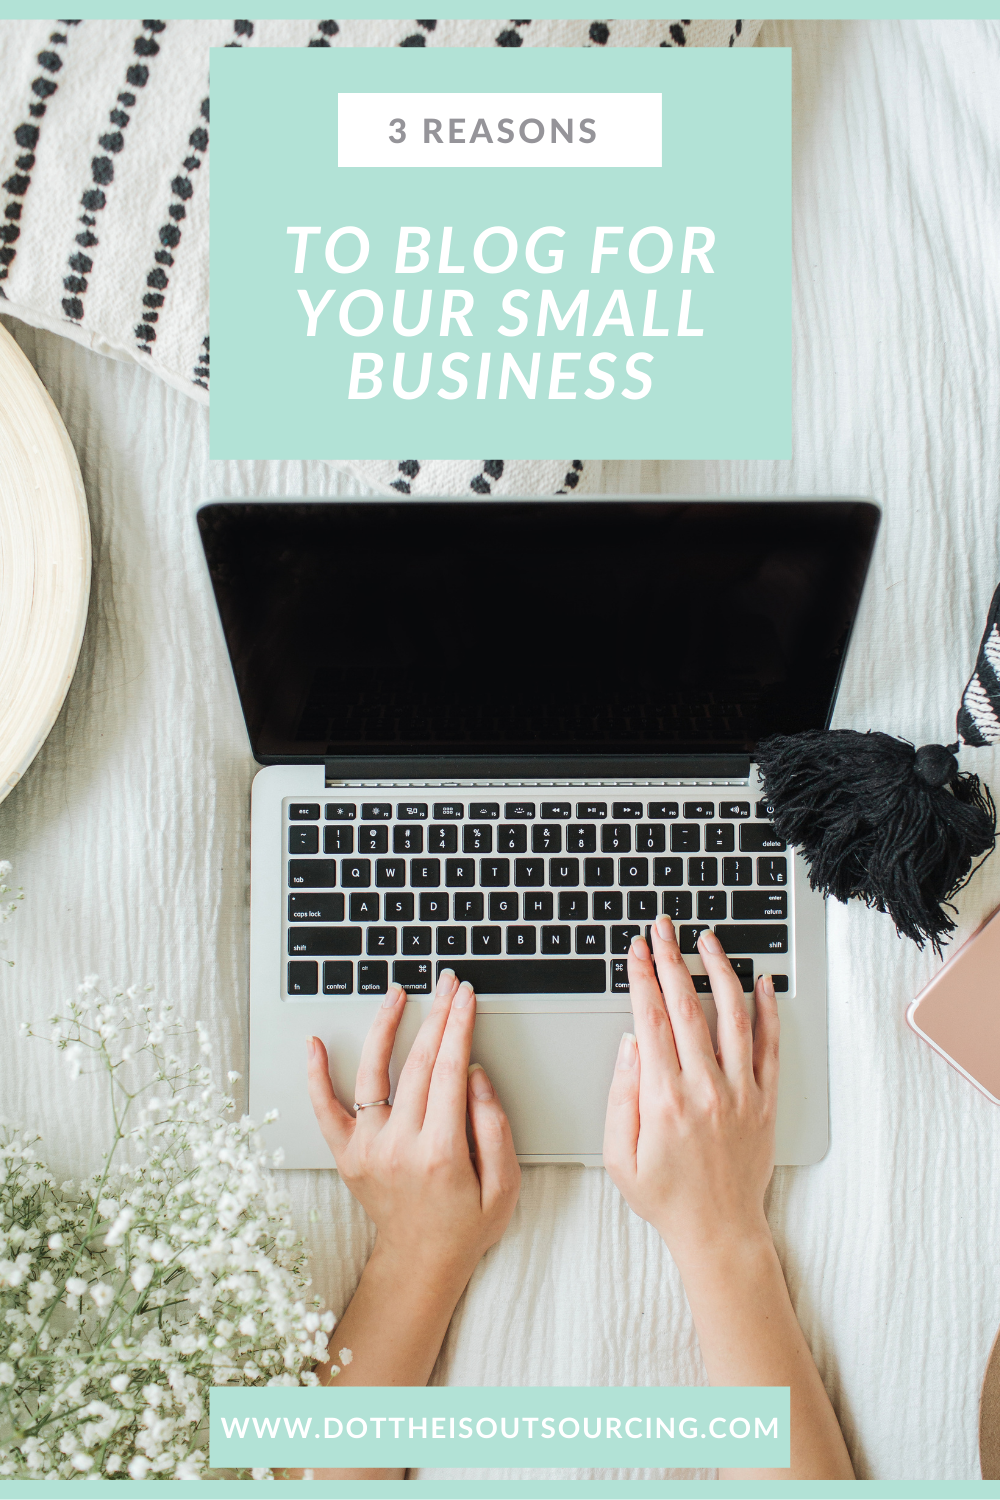 3 Reasons to Blog for Your Small Business